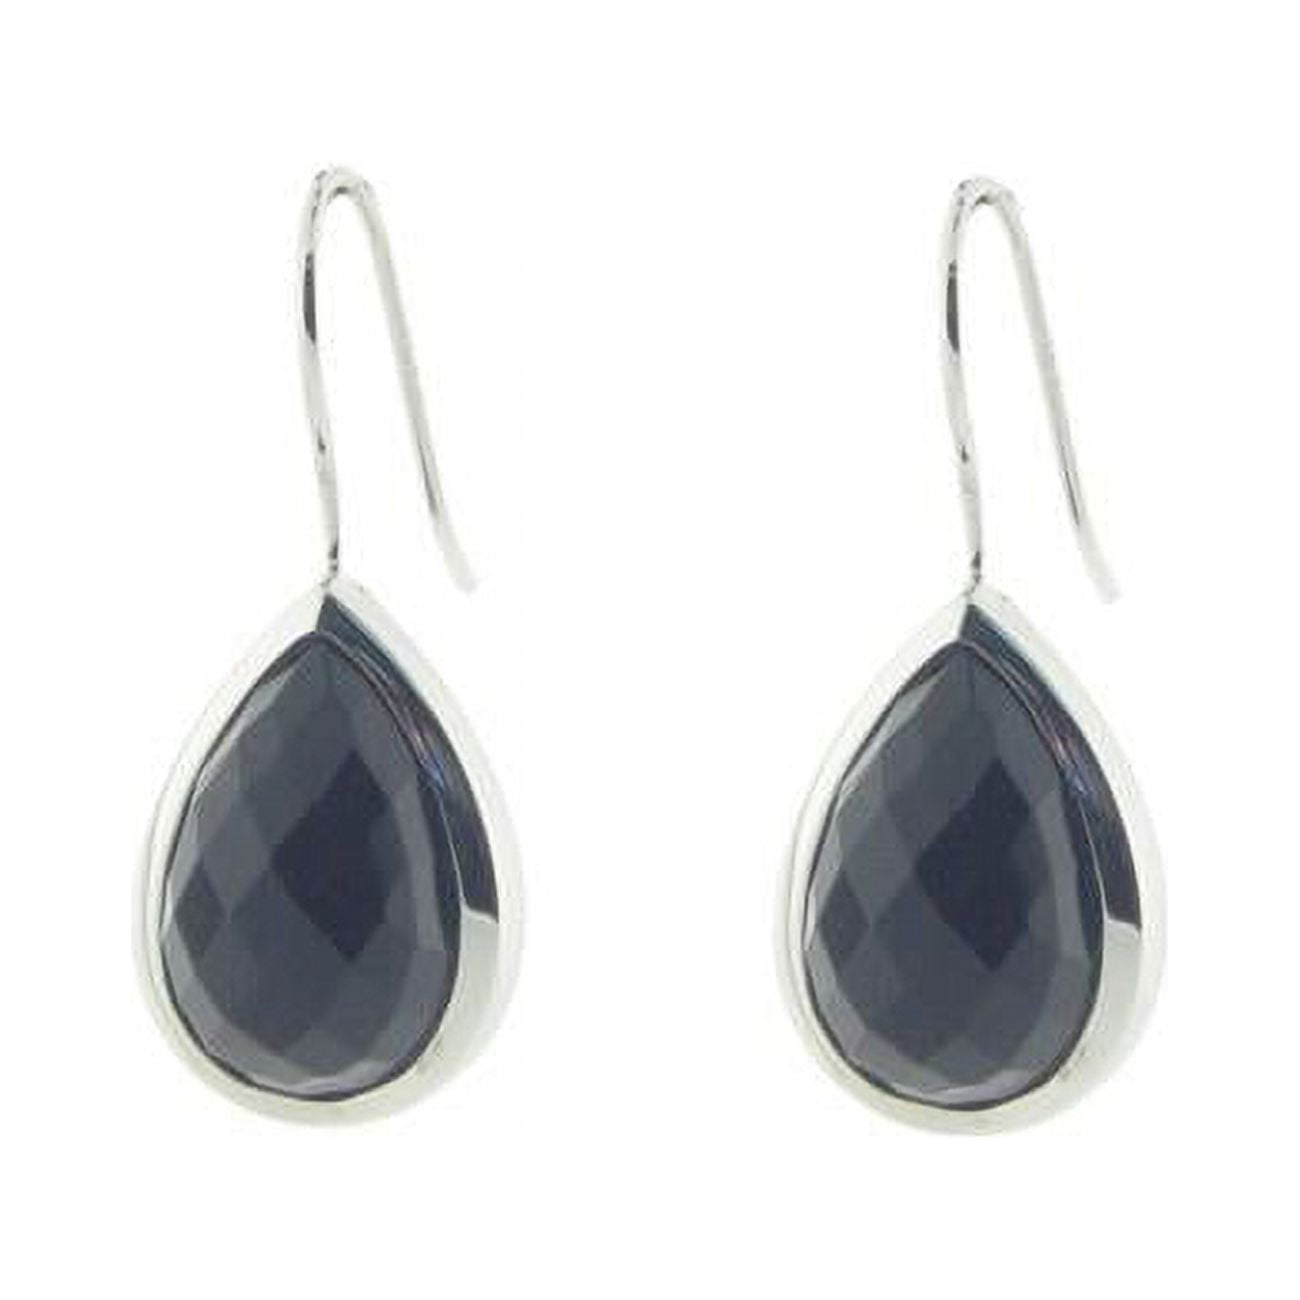 Picture of Fronay 725215B Faceted Black Onyx Hook Earrings in Sterling Silver